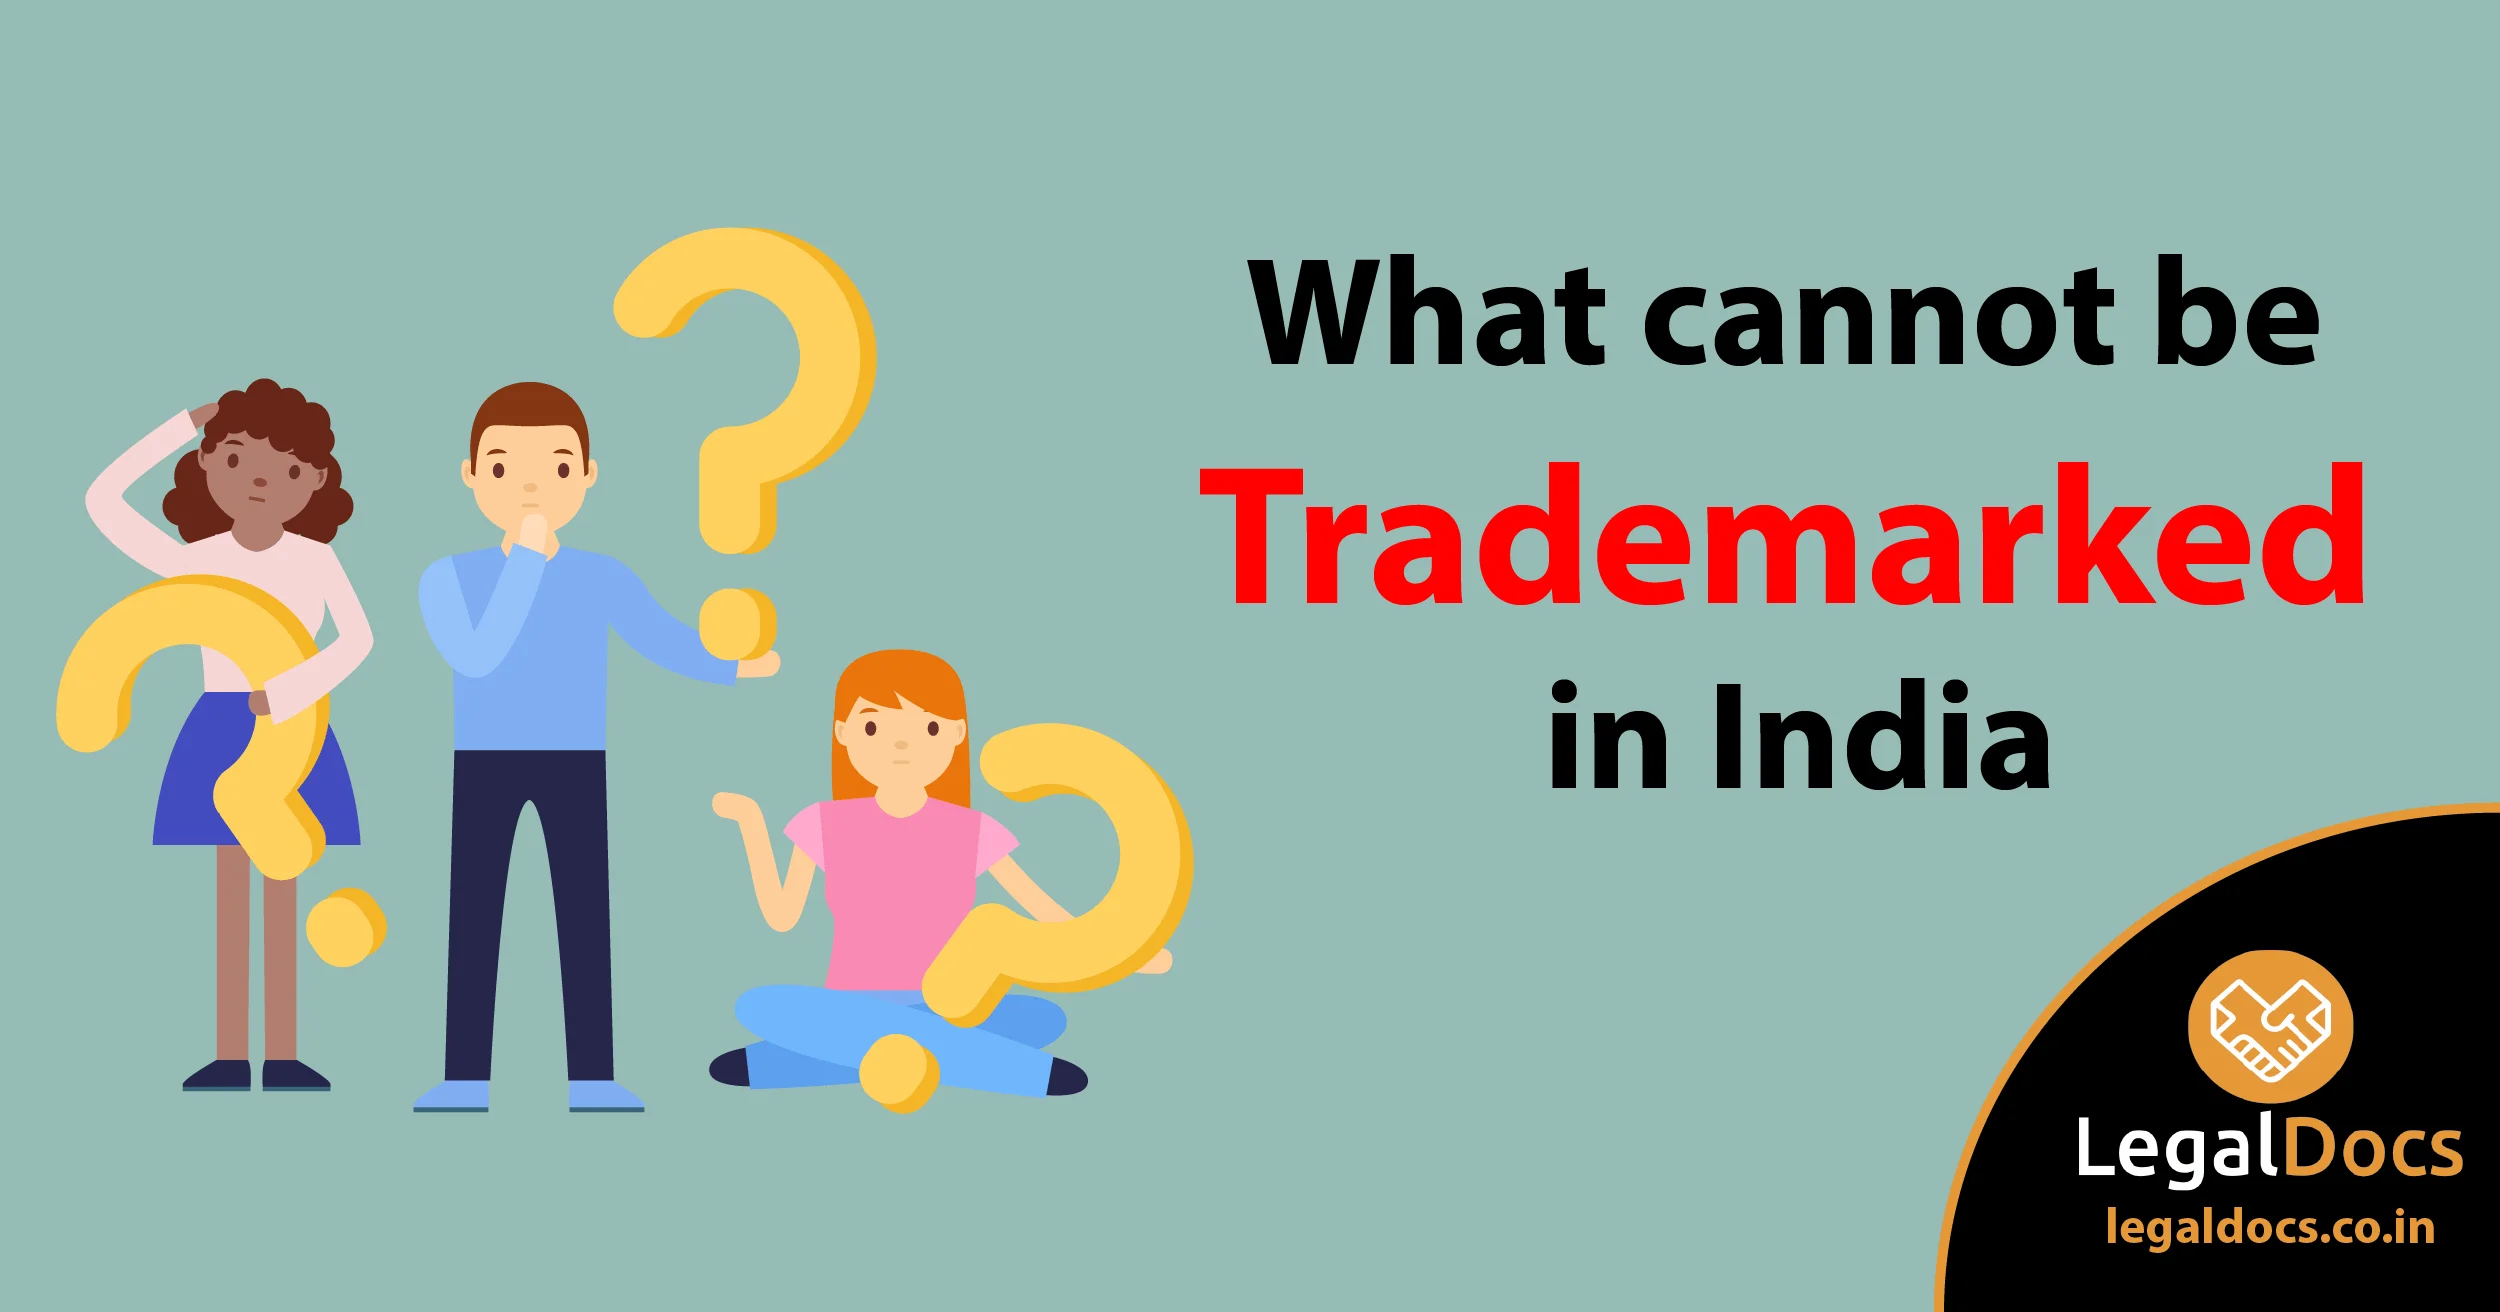 What Cannot be Trademarked in India?